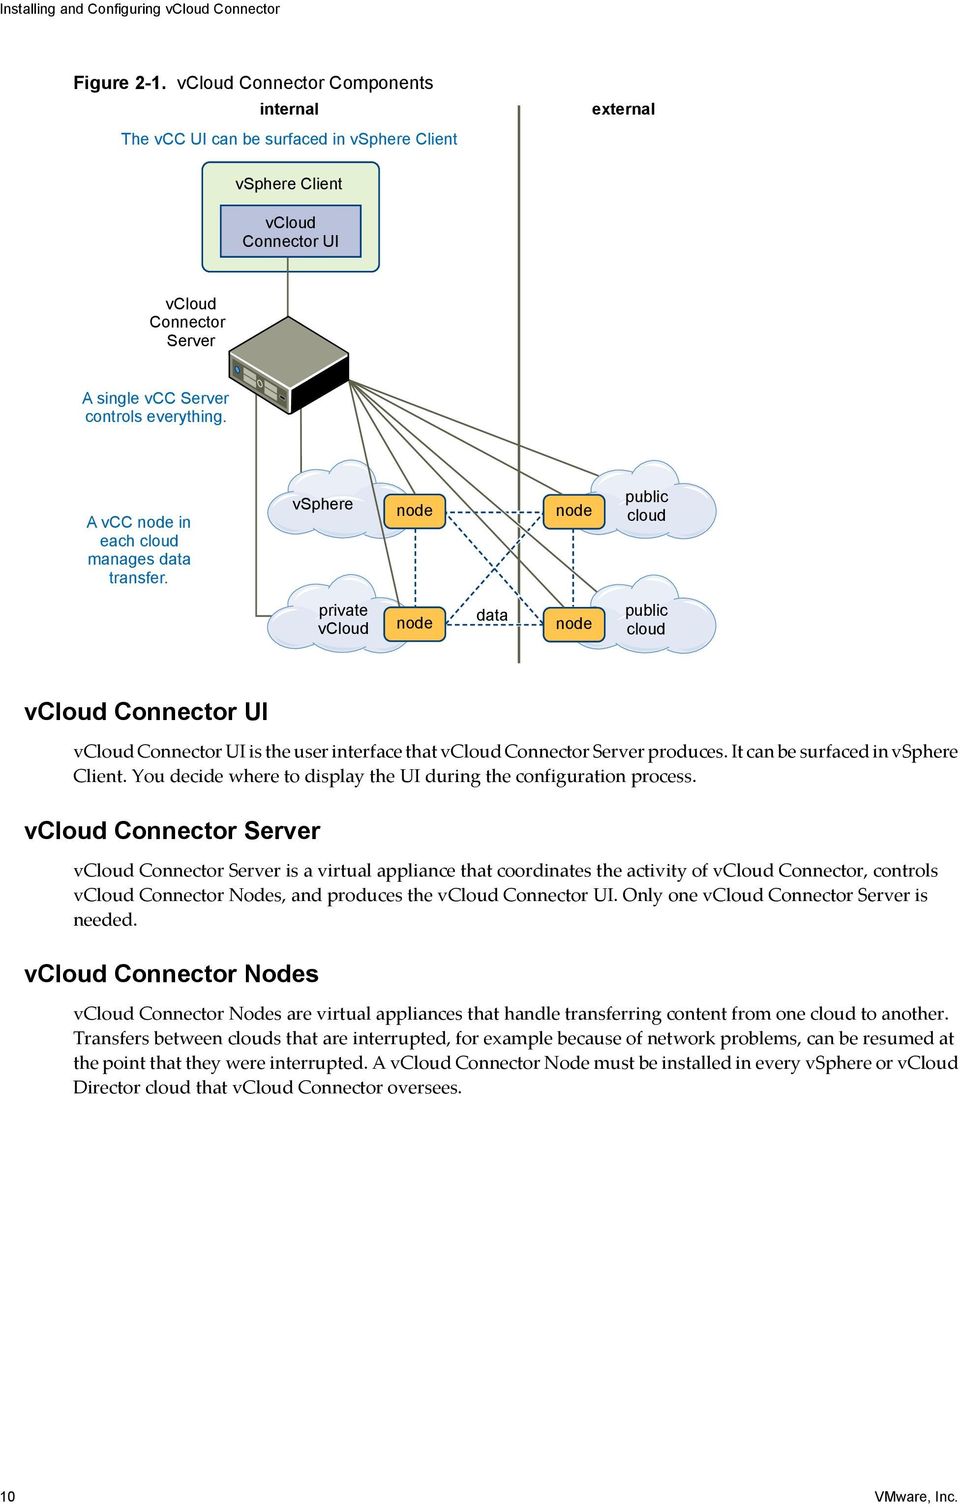 A vcc node in each cloud manages data transfer.